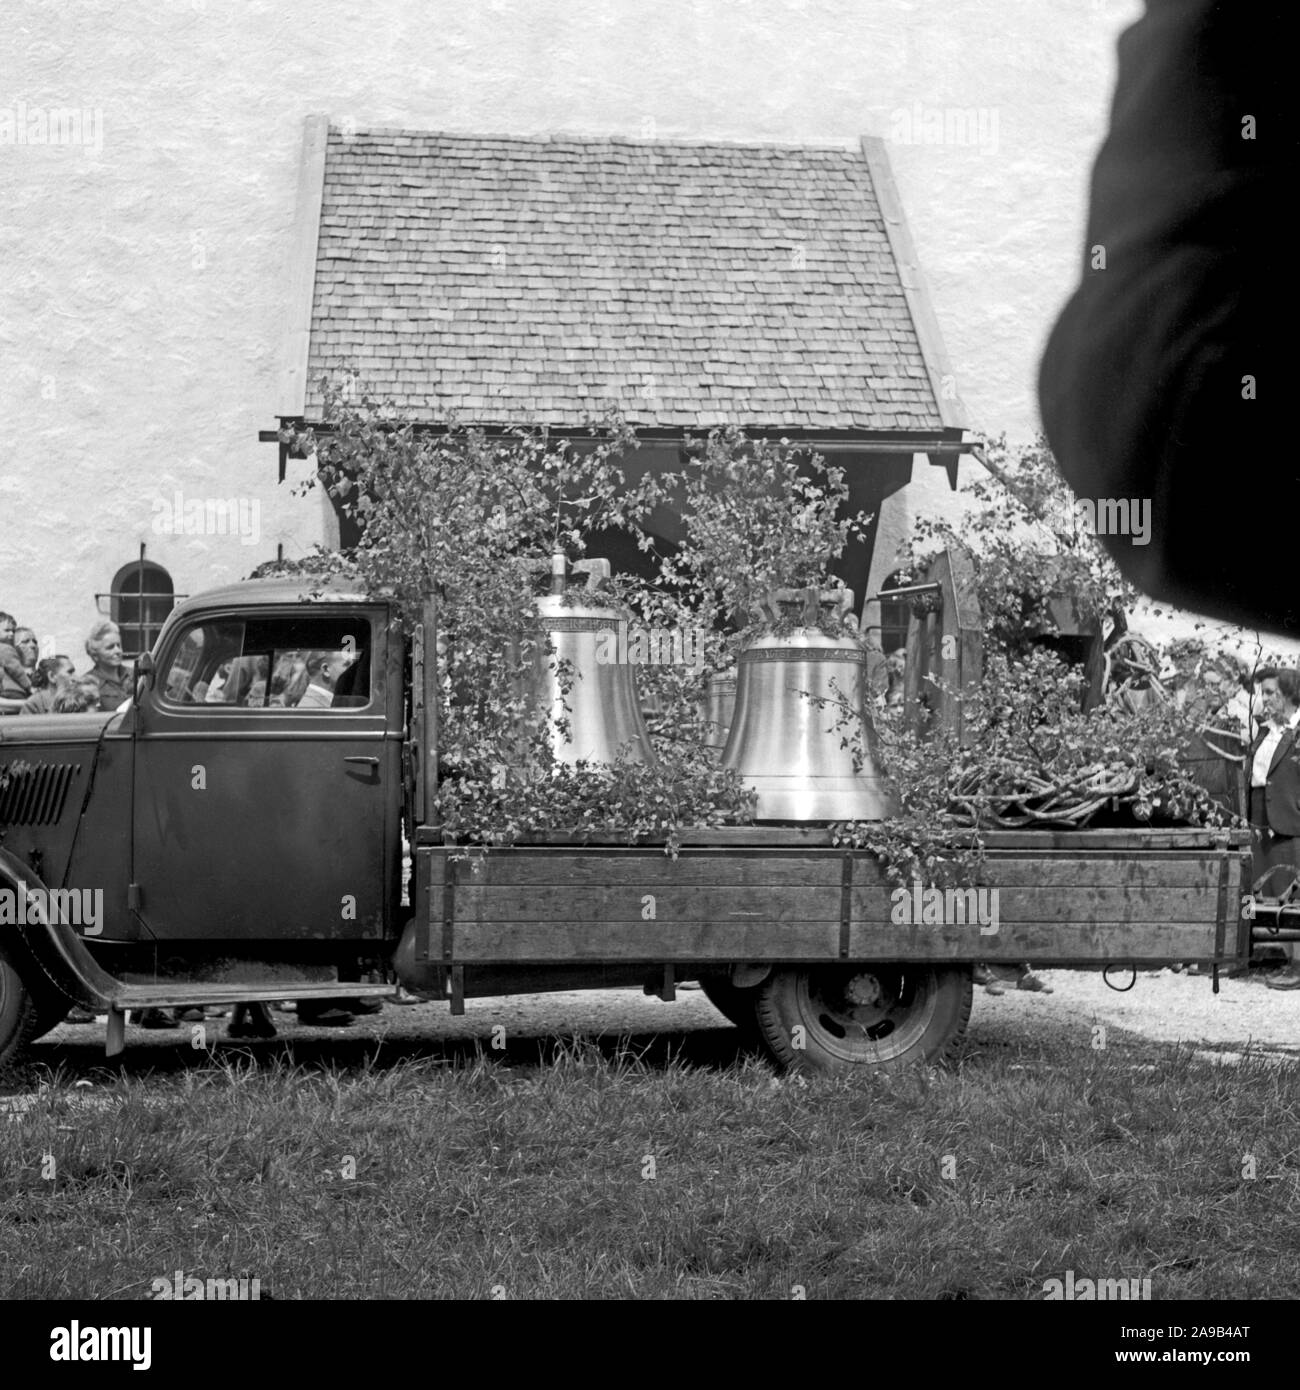 A village near Mittenwald gets a delivery of new church bells for its church, Germany 1955 Stock Photo